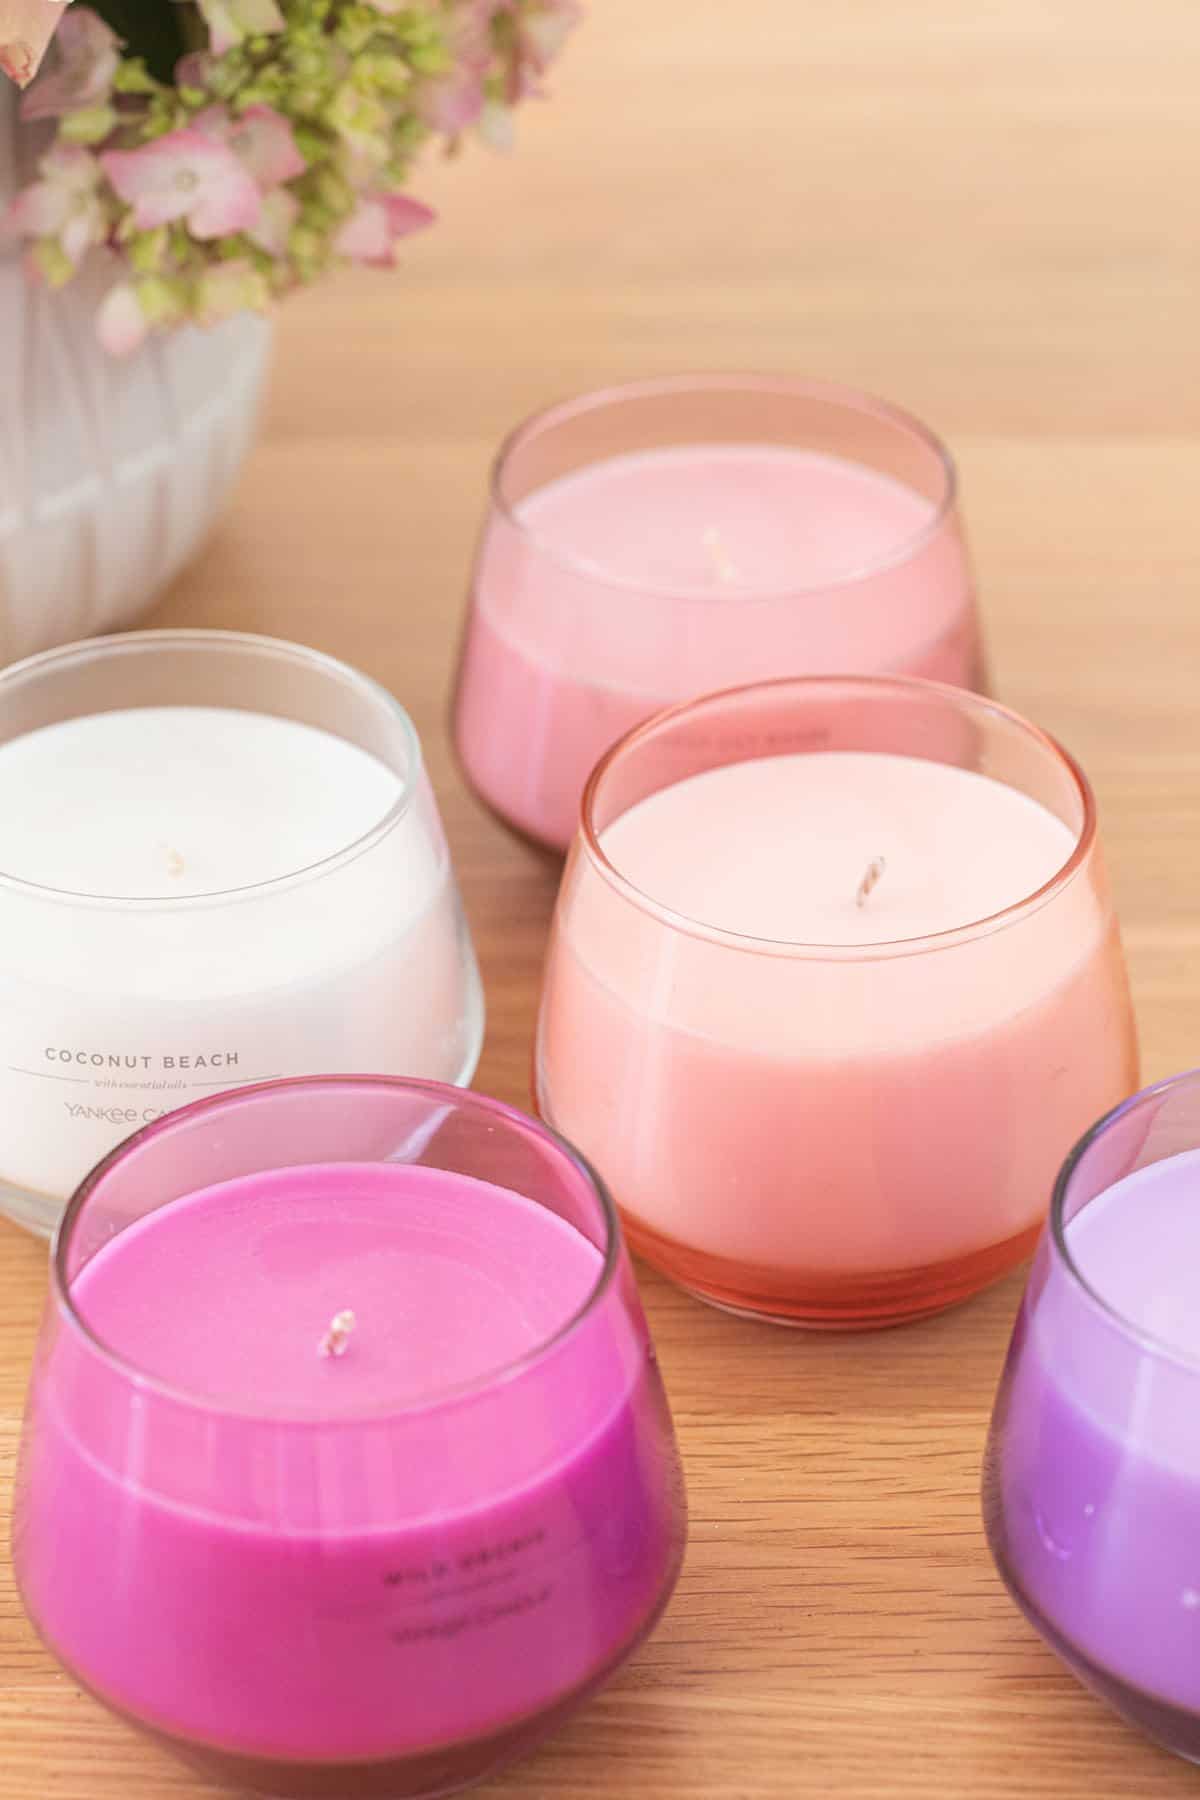 Yankee Candle Studio Collection candles